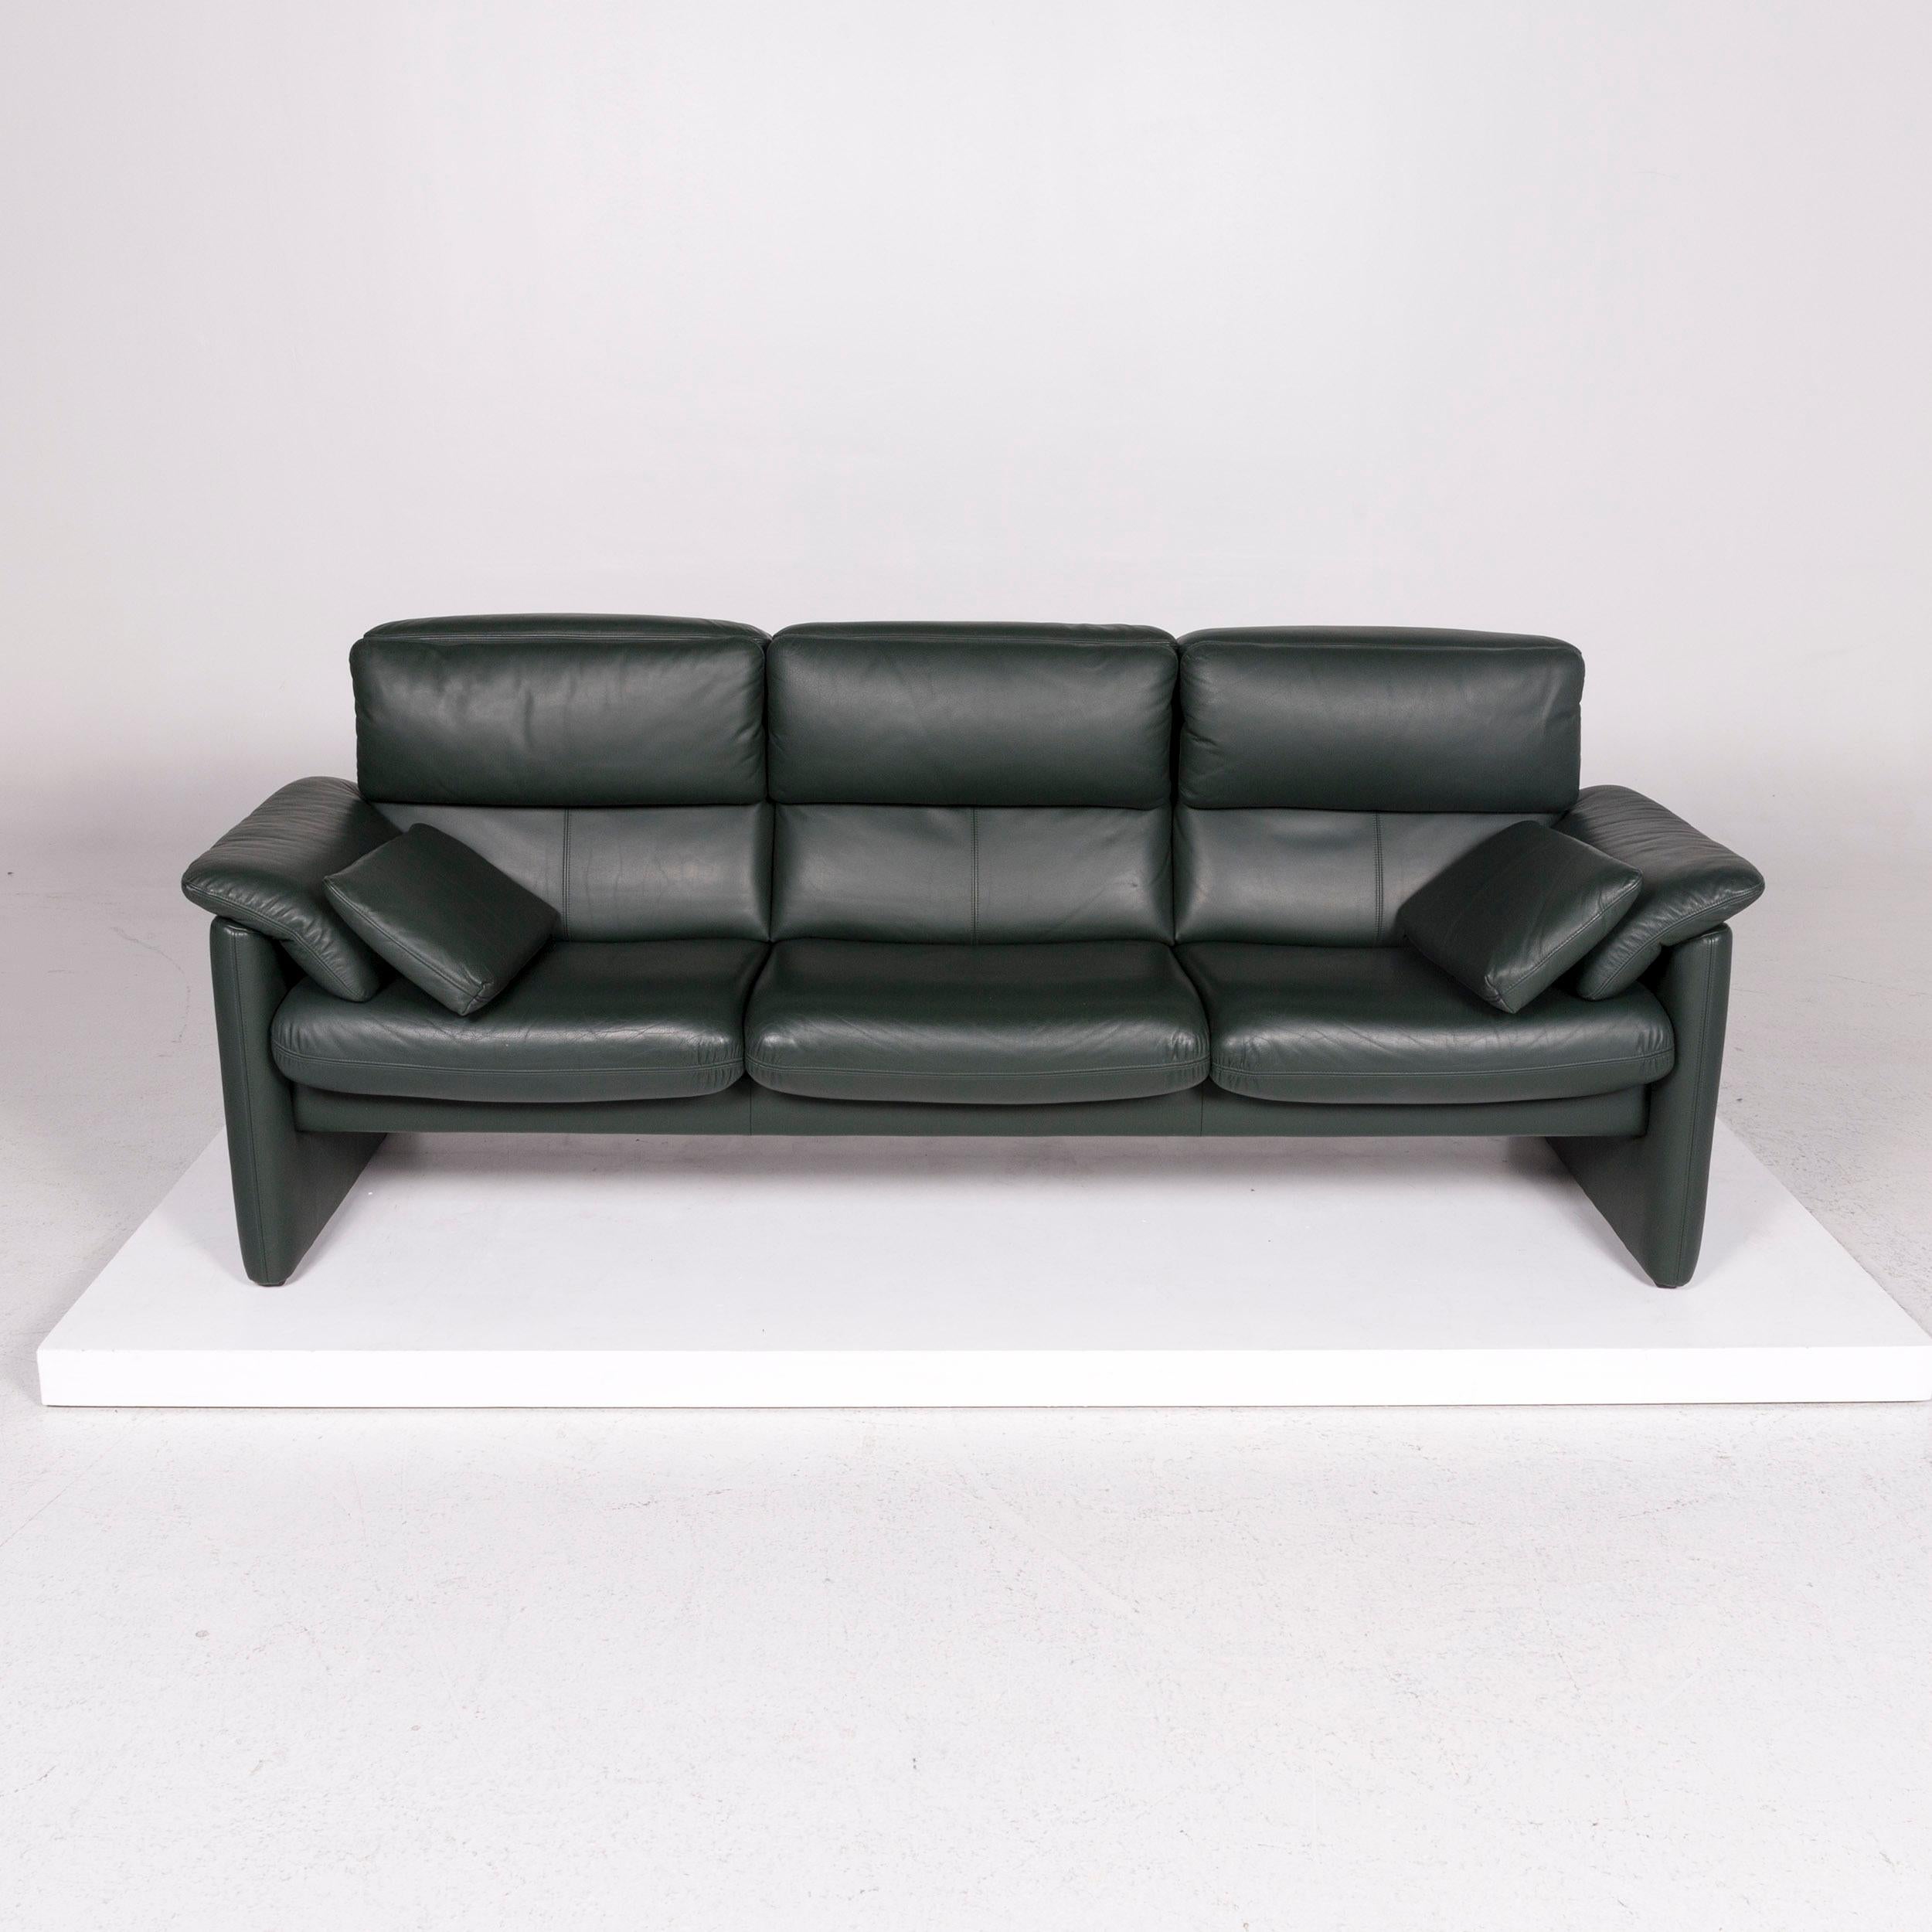 Erpo Leather Sofa Green Three-Seat Function Relax Function Couch In Good Condition For Sale In Cologne, DE